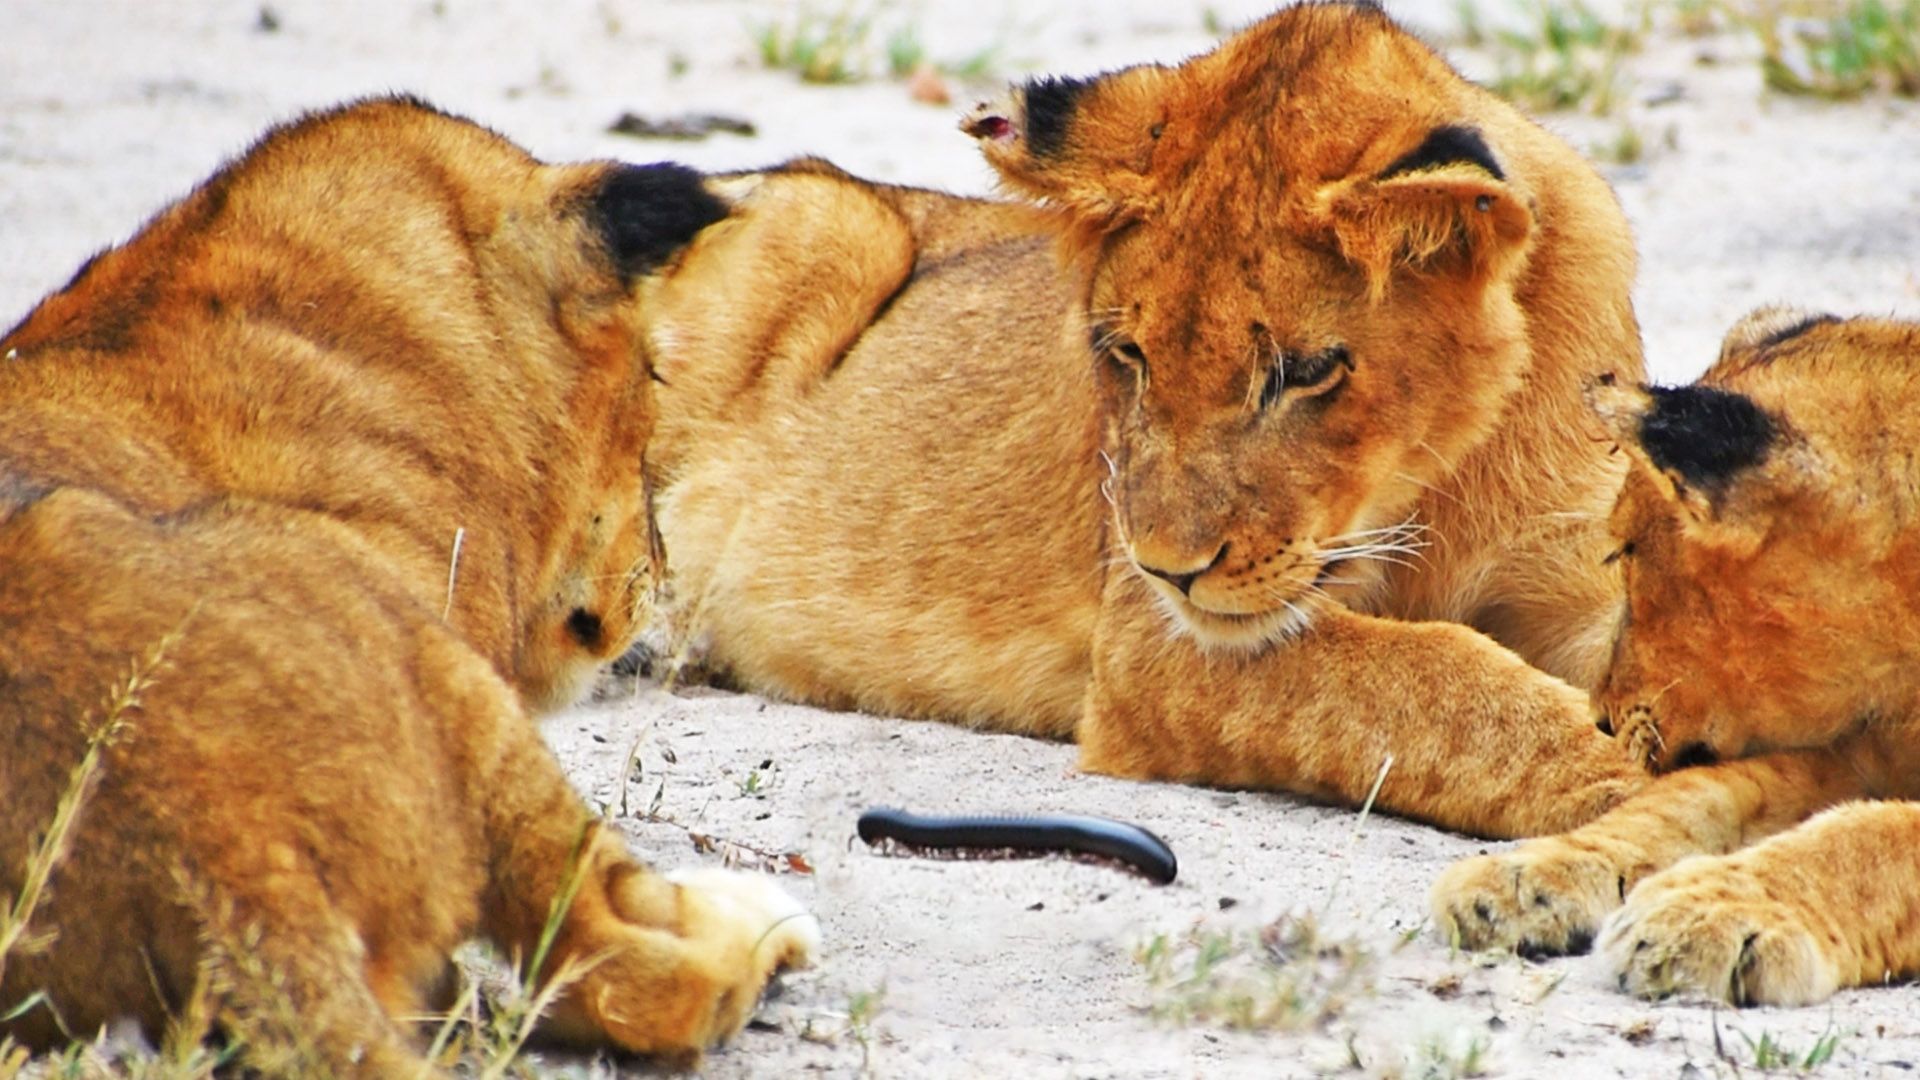 Millipede Tries to Climb on Lion’s Tail